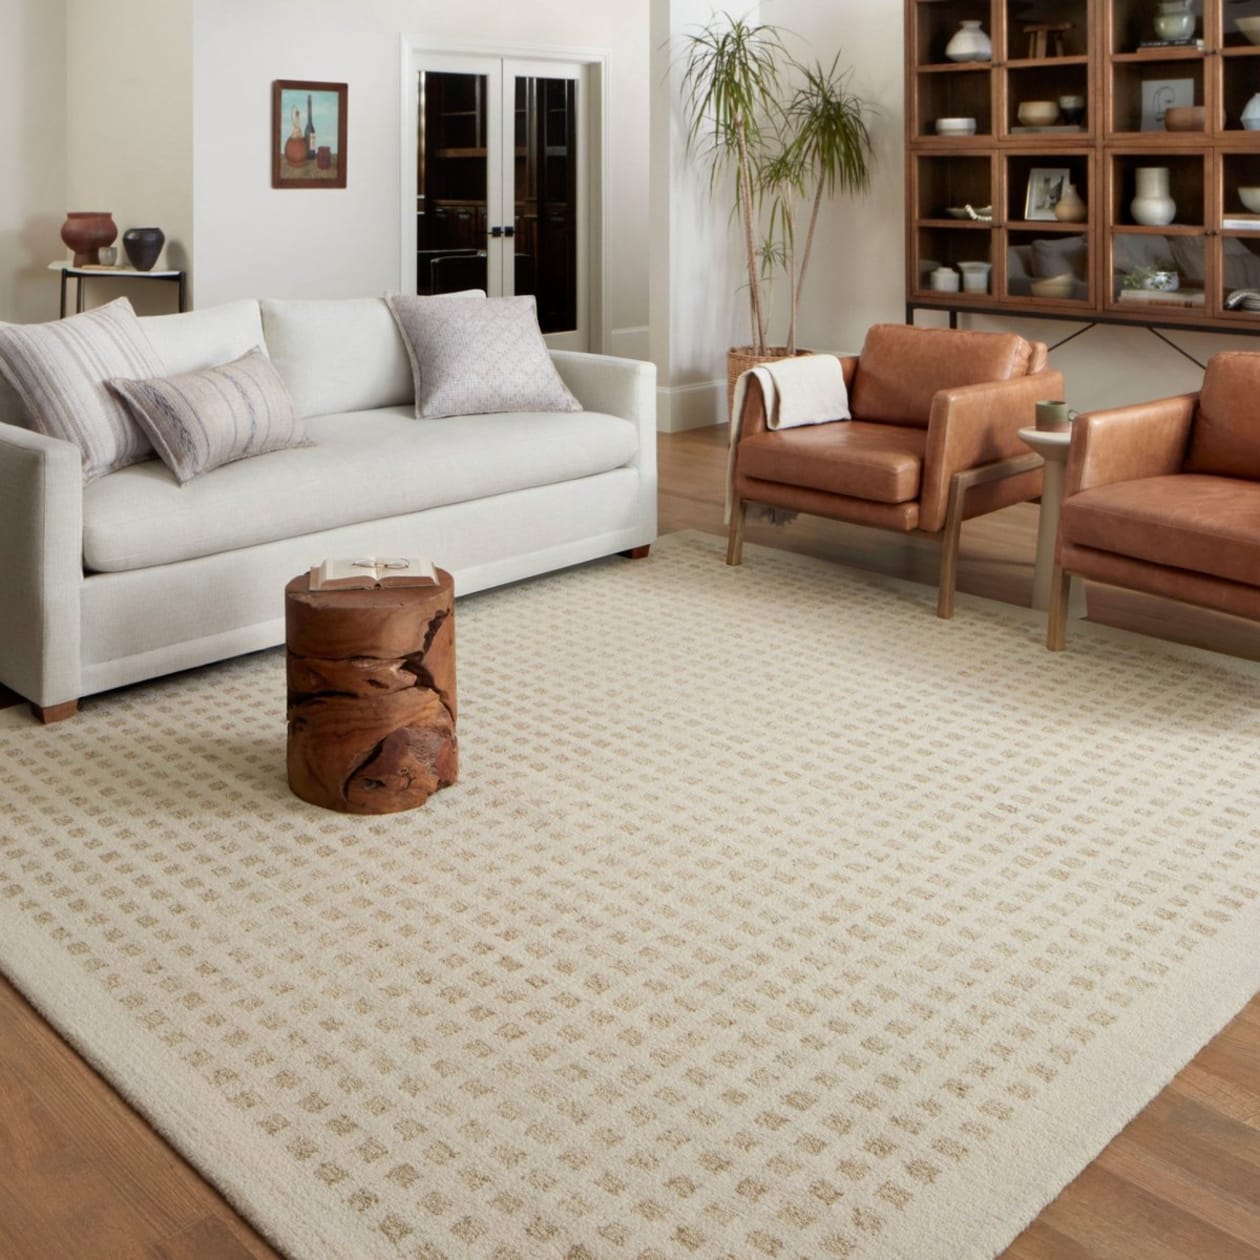 Extra Large Living Room Area Rugs